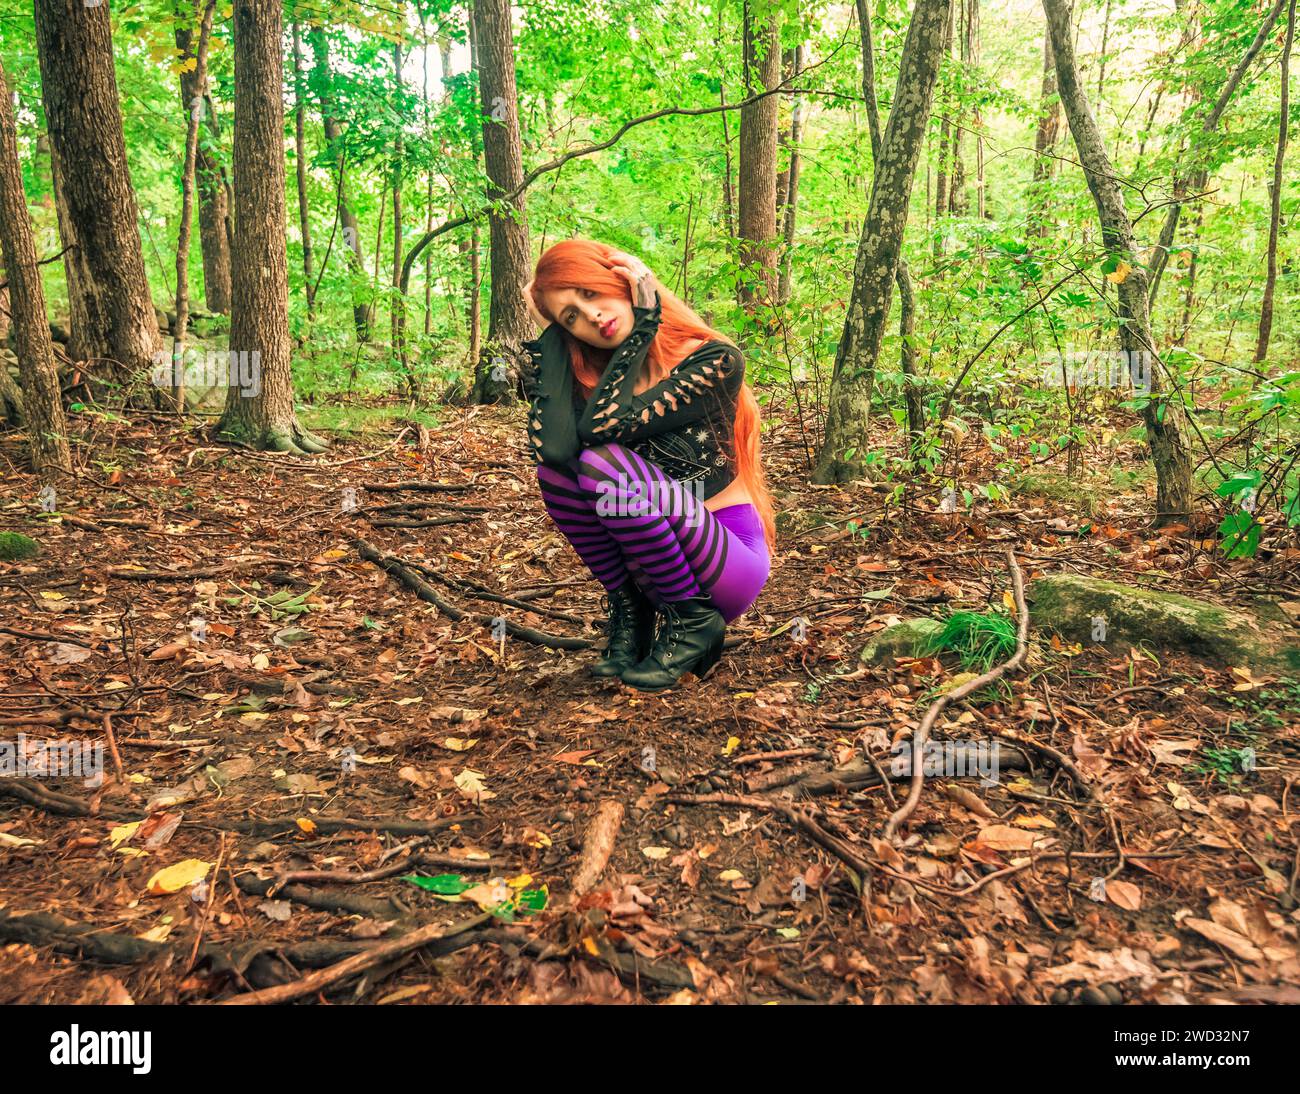 A red-haired young woman in purple striped leggings posing in the green forest Stock Photo